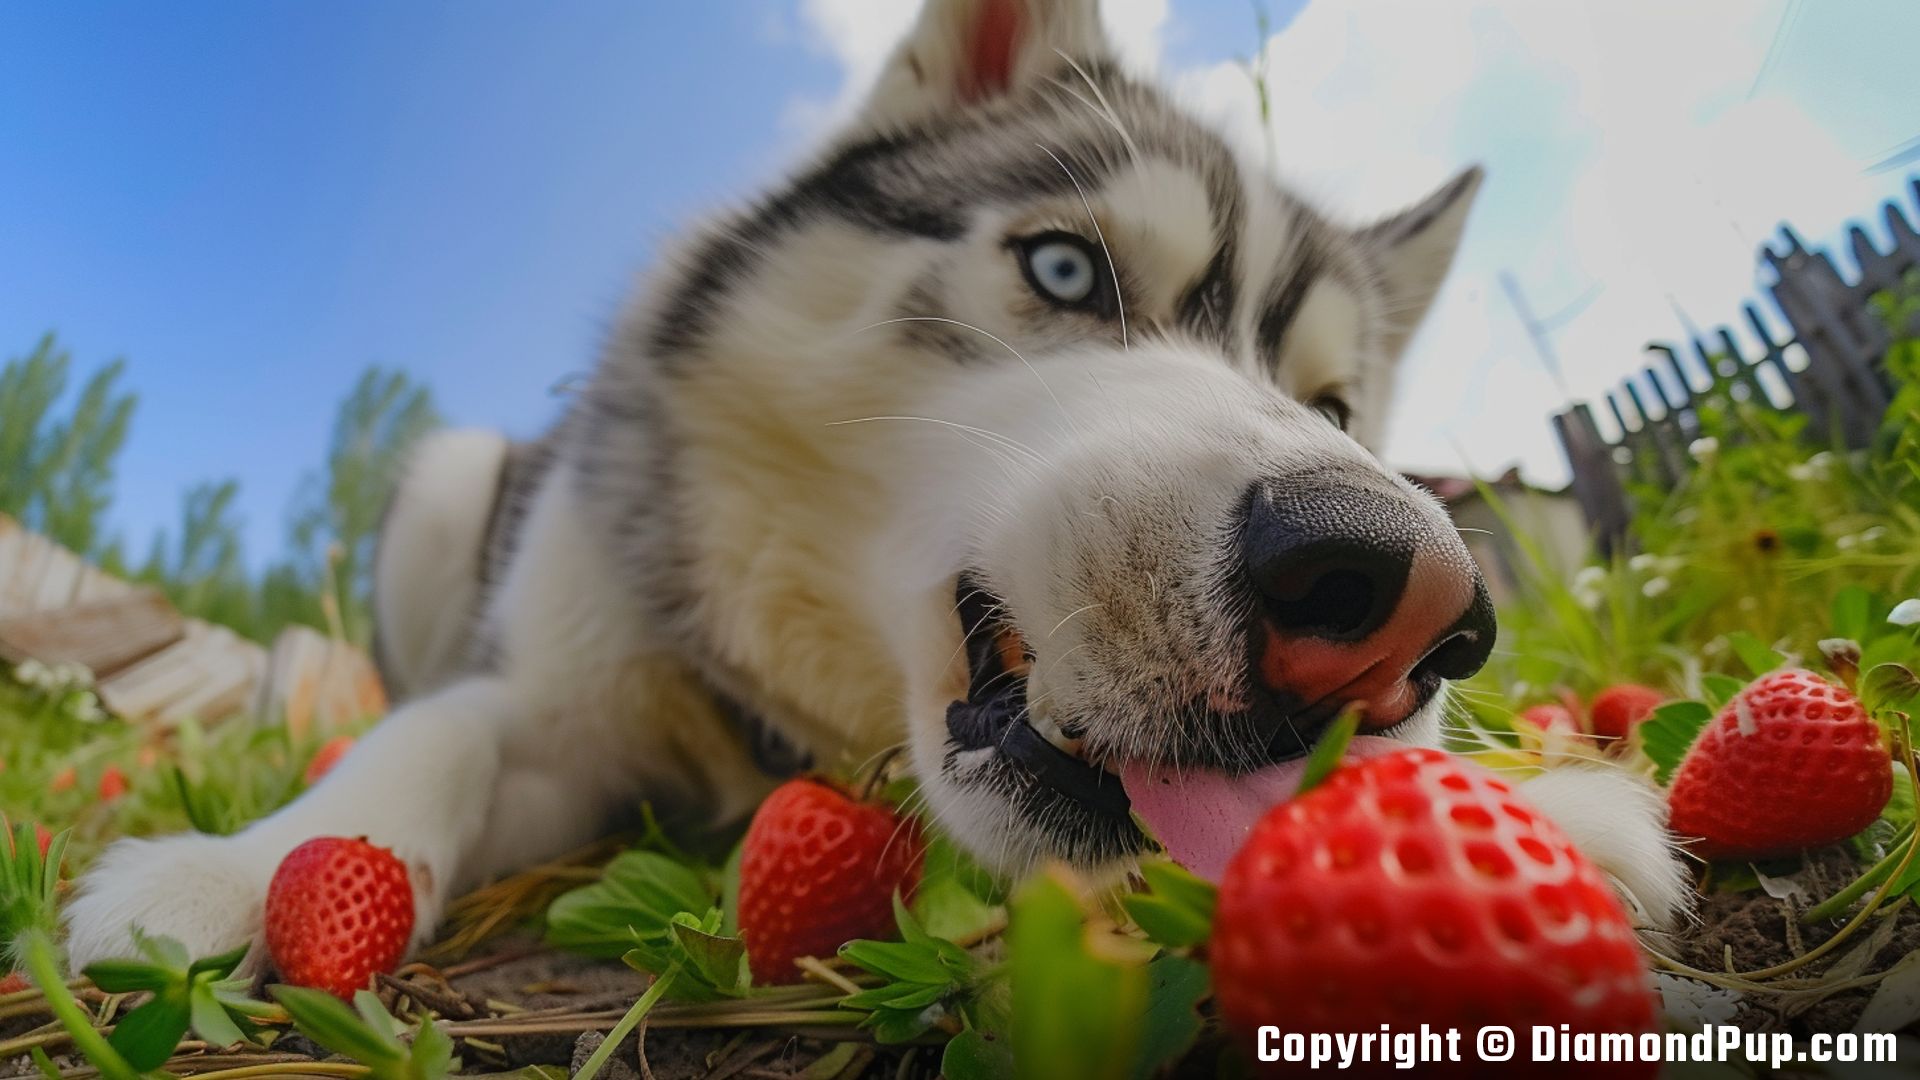 Photo of a Playful Husky Snacking on Strawberries